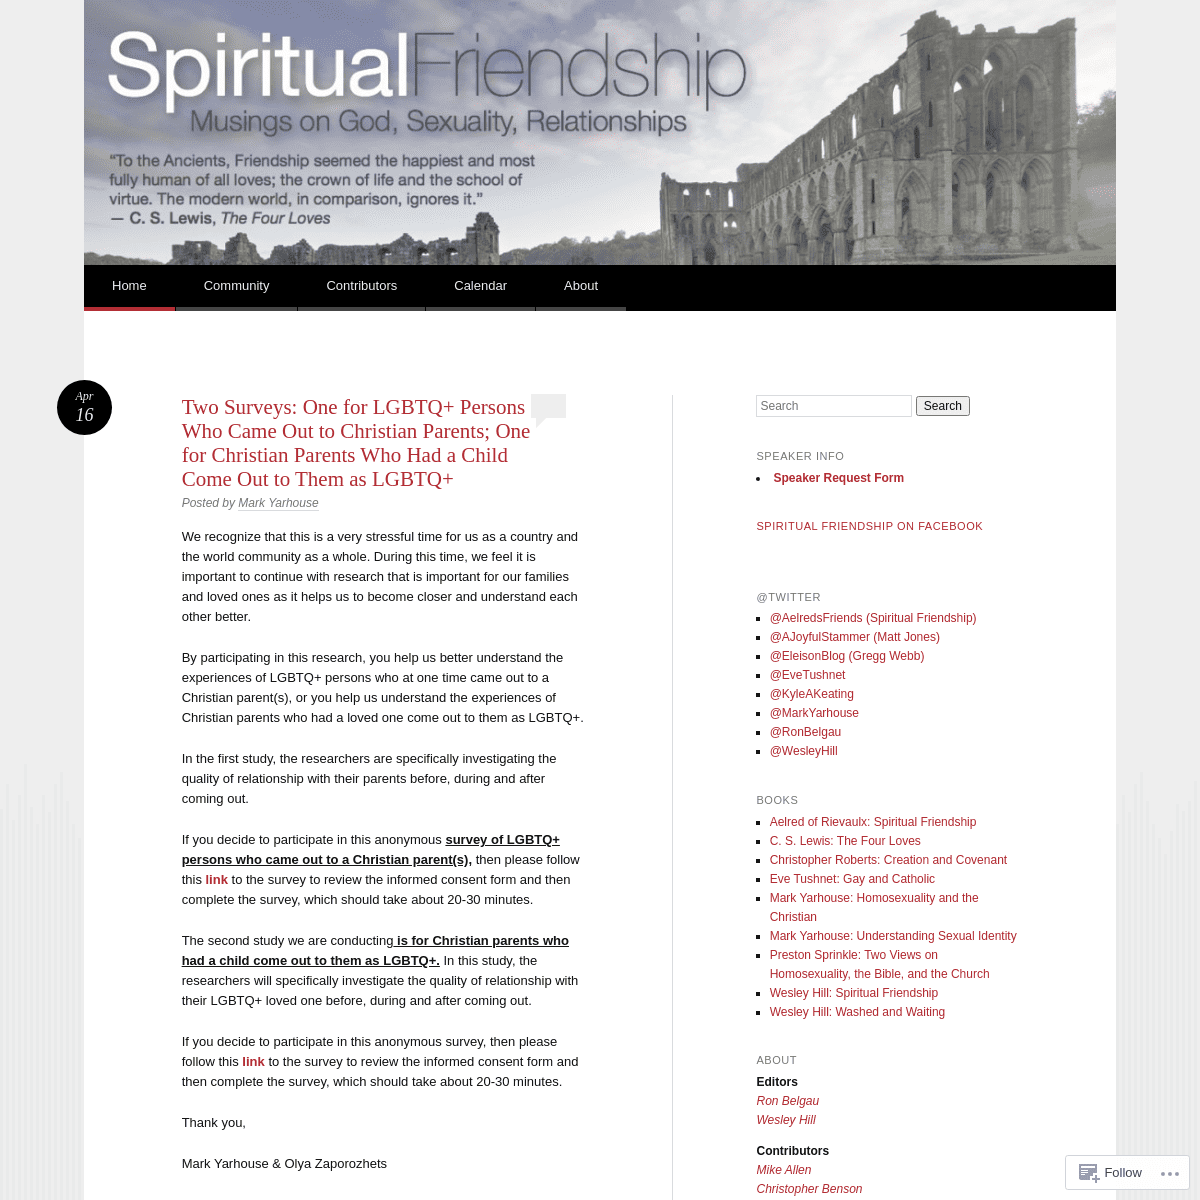 A complete backup of https://spiritualfriendship.org